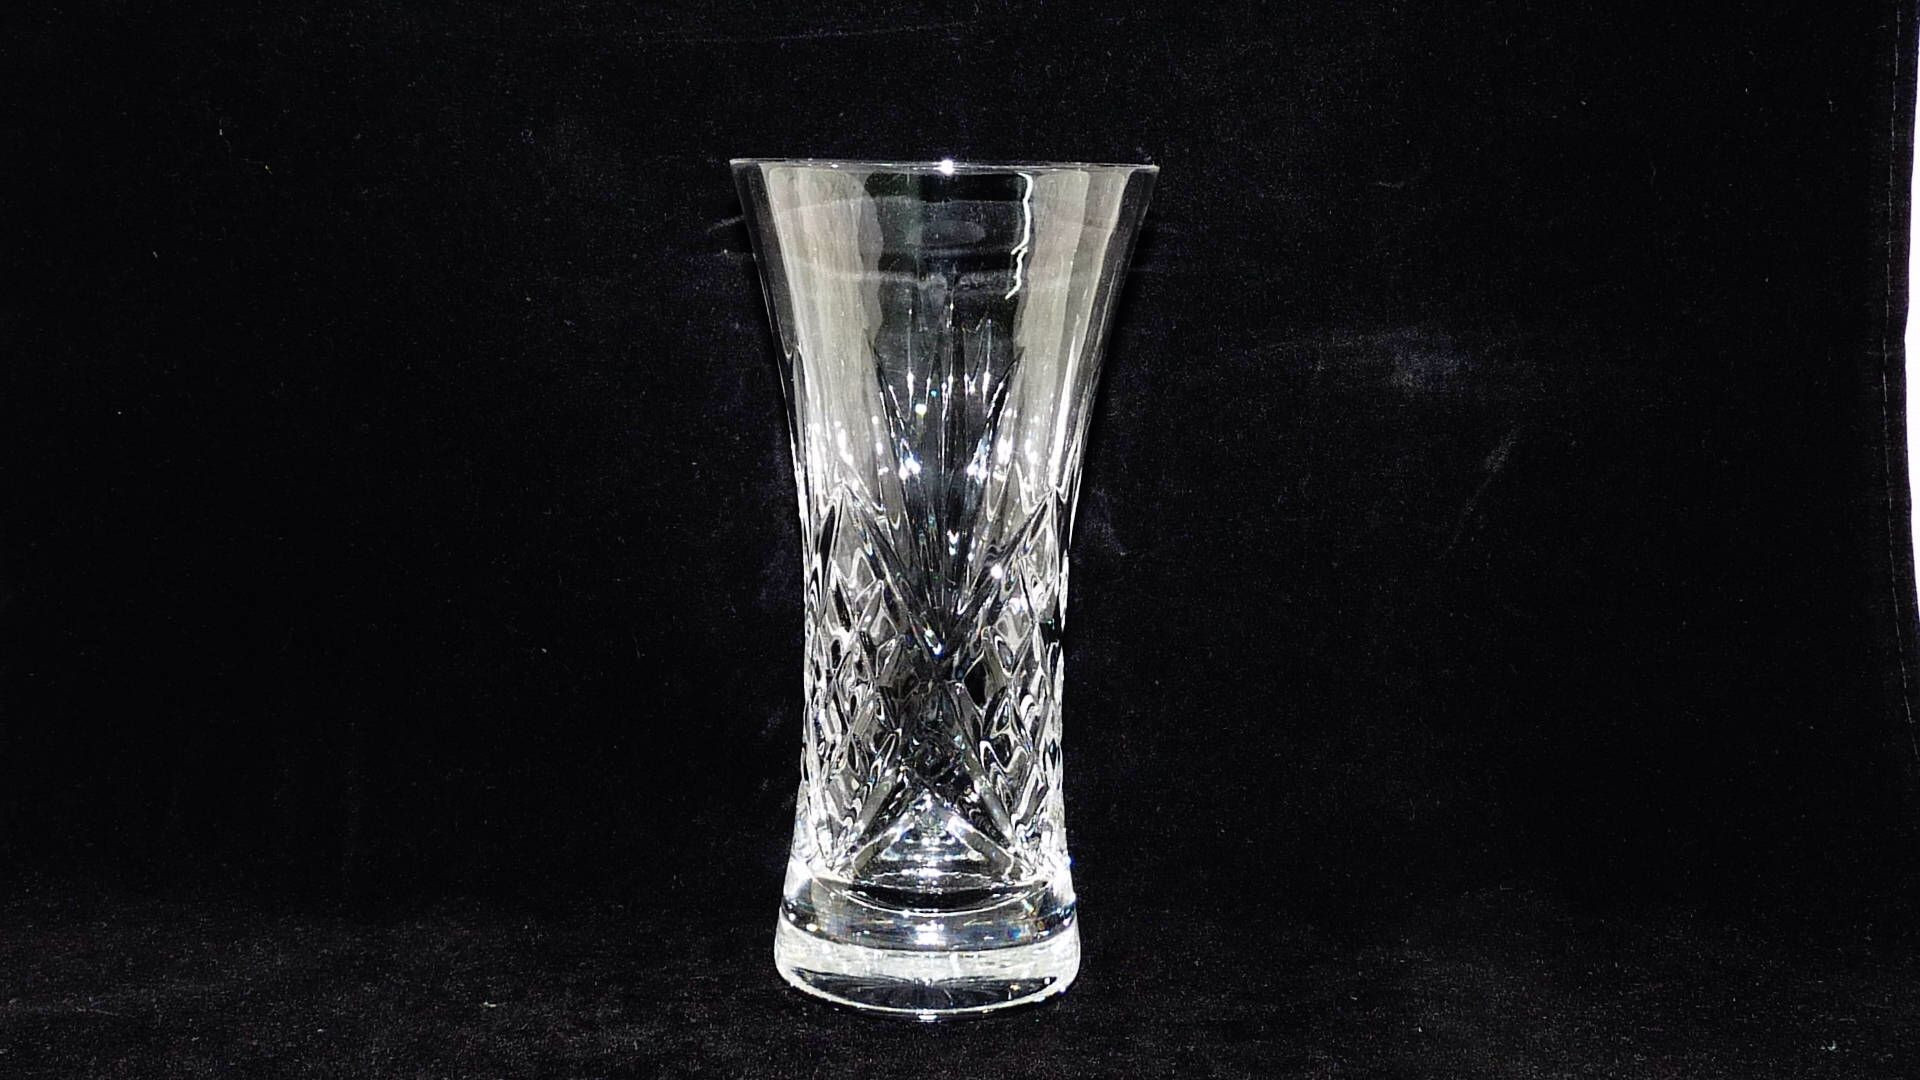 27 Popular Retro Vases for Sale 2024 free download retro vases for sale of vintage clear glass vases photos excited to share the latest intended for vintage clear glass vases photos excited to share the latest addition to my etsy shop small